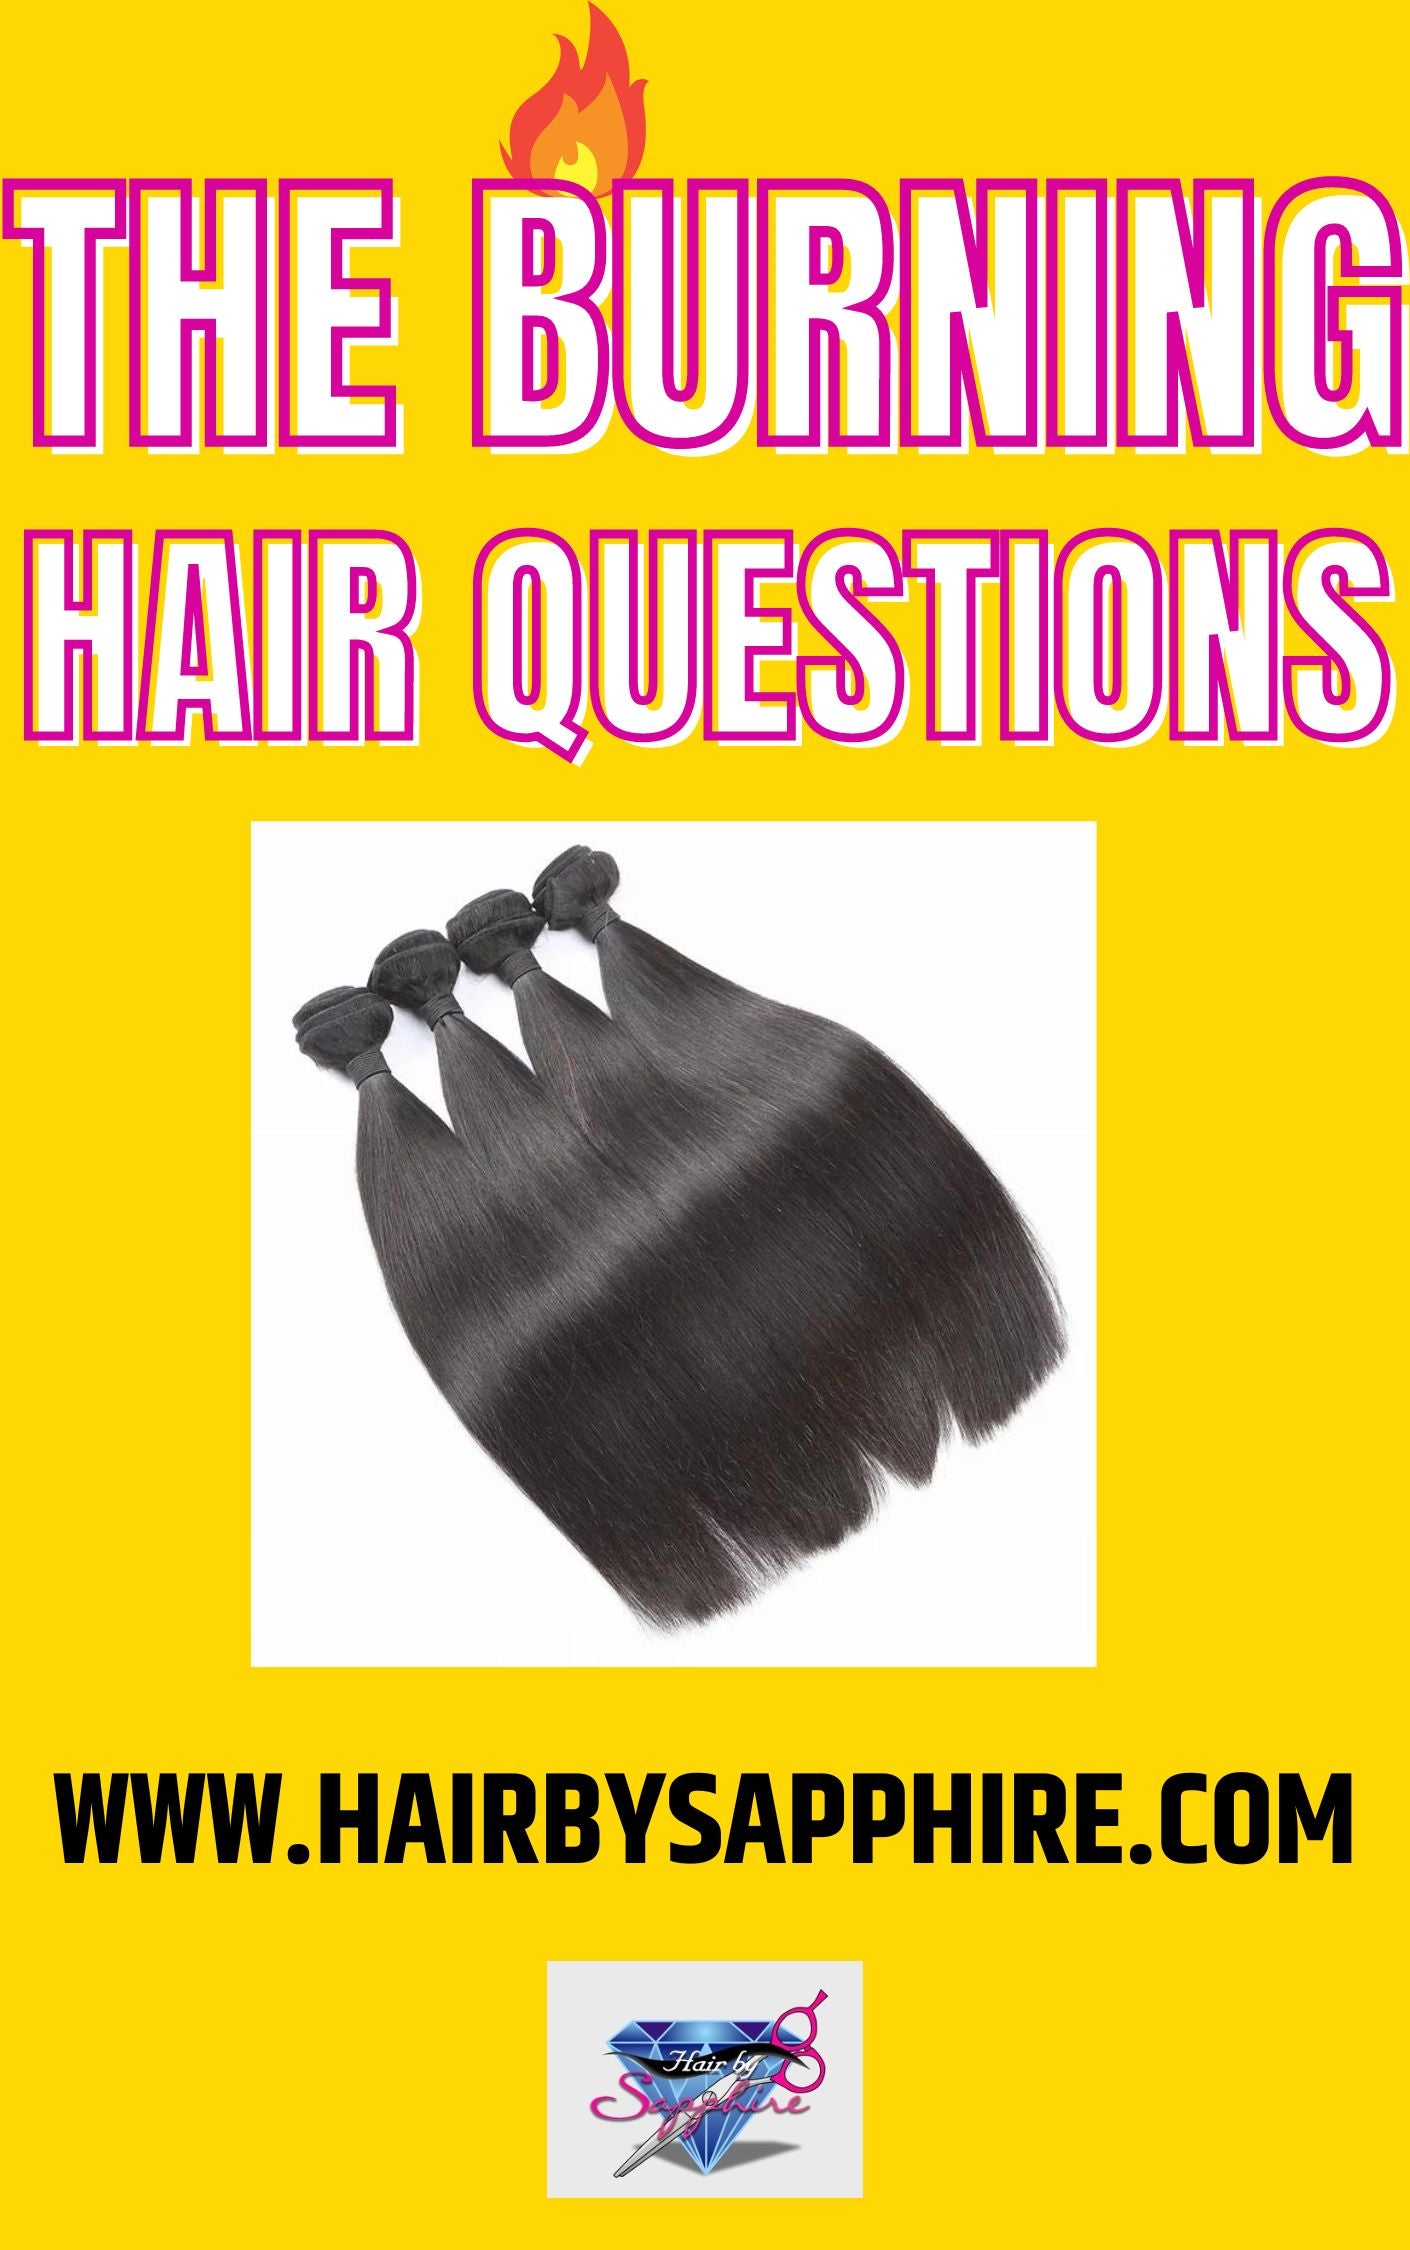 HOLLYWOOD HAIR DESIGNER AND WIG MAKER SAPPHIRE LAUNCHES "THE BURNING HAIR QUESTIONS" E-BOOK